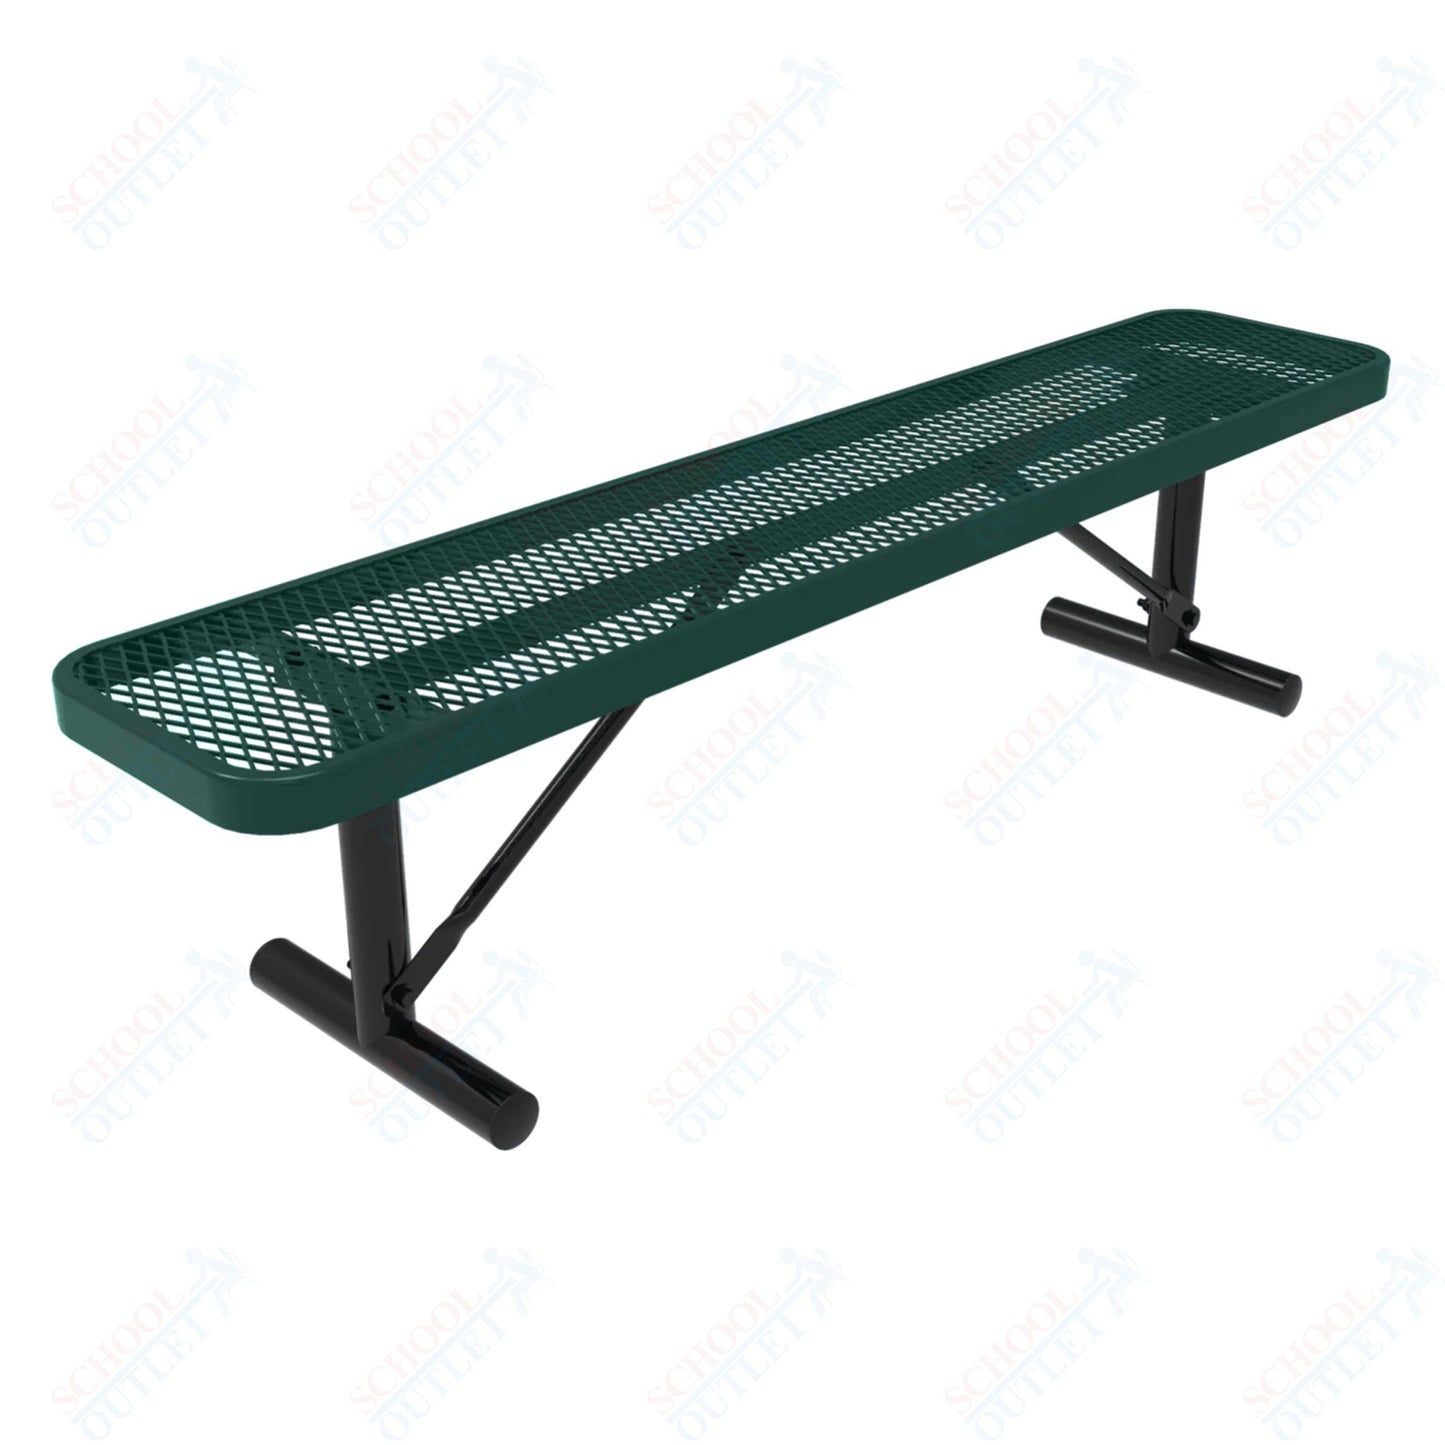 MyTcoat - Player's Outdoor Portable Bench without Back 8' L (MYT-BPY08-33)